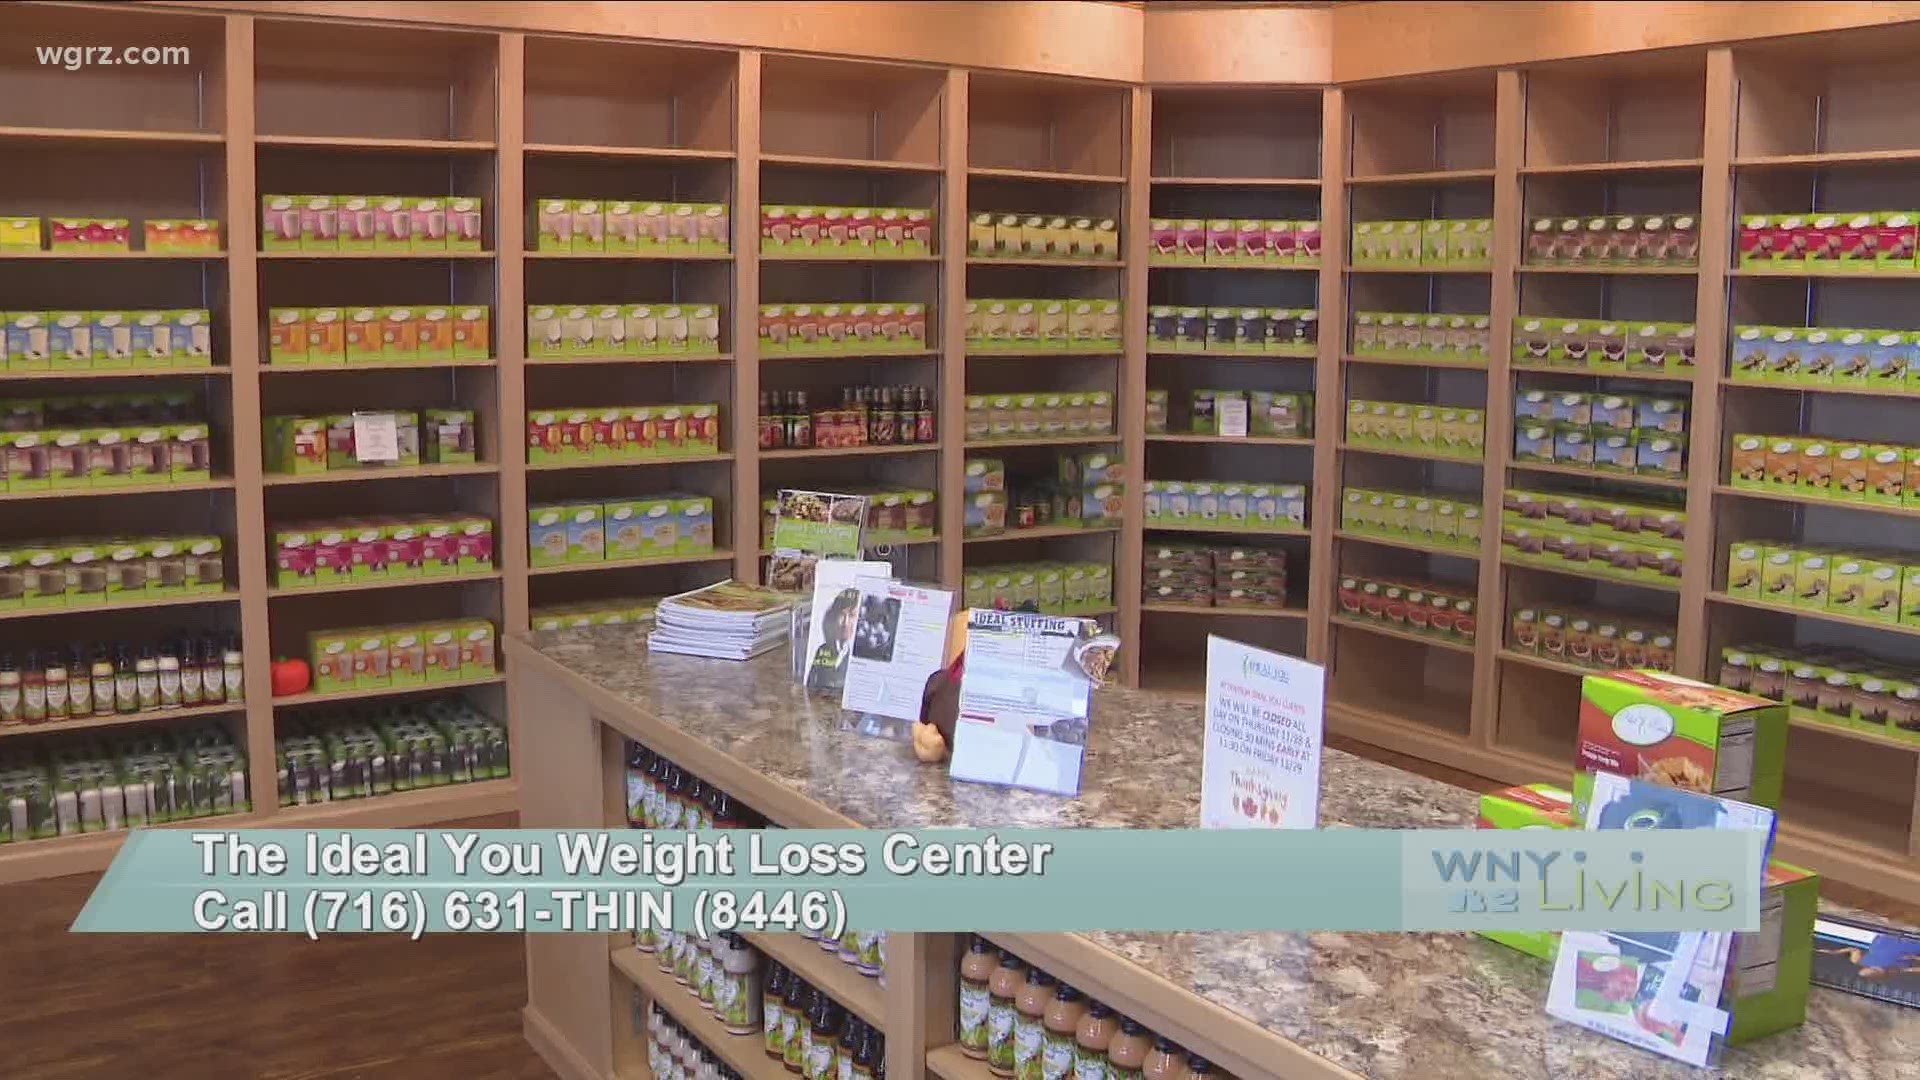 WNY Living - August 29 - The Ideal You Weight Loss Center (THIS VIDEO IS SPONSORED BY THE IDEAL YOU WEIGHT LOSS CENTER)